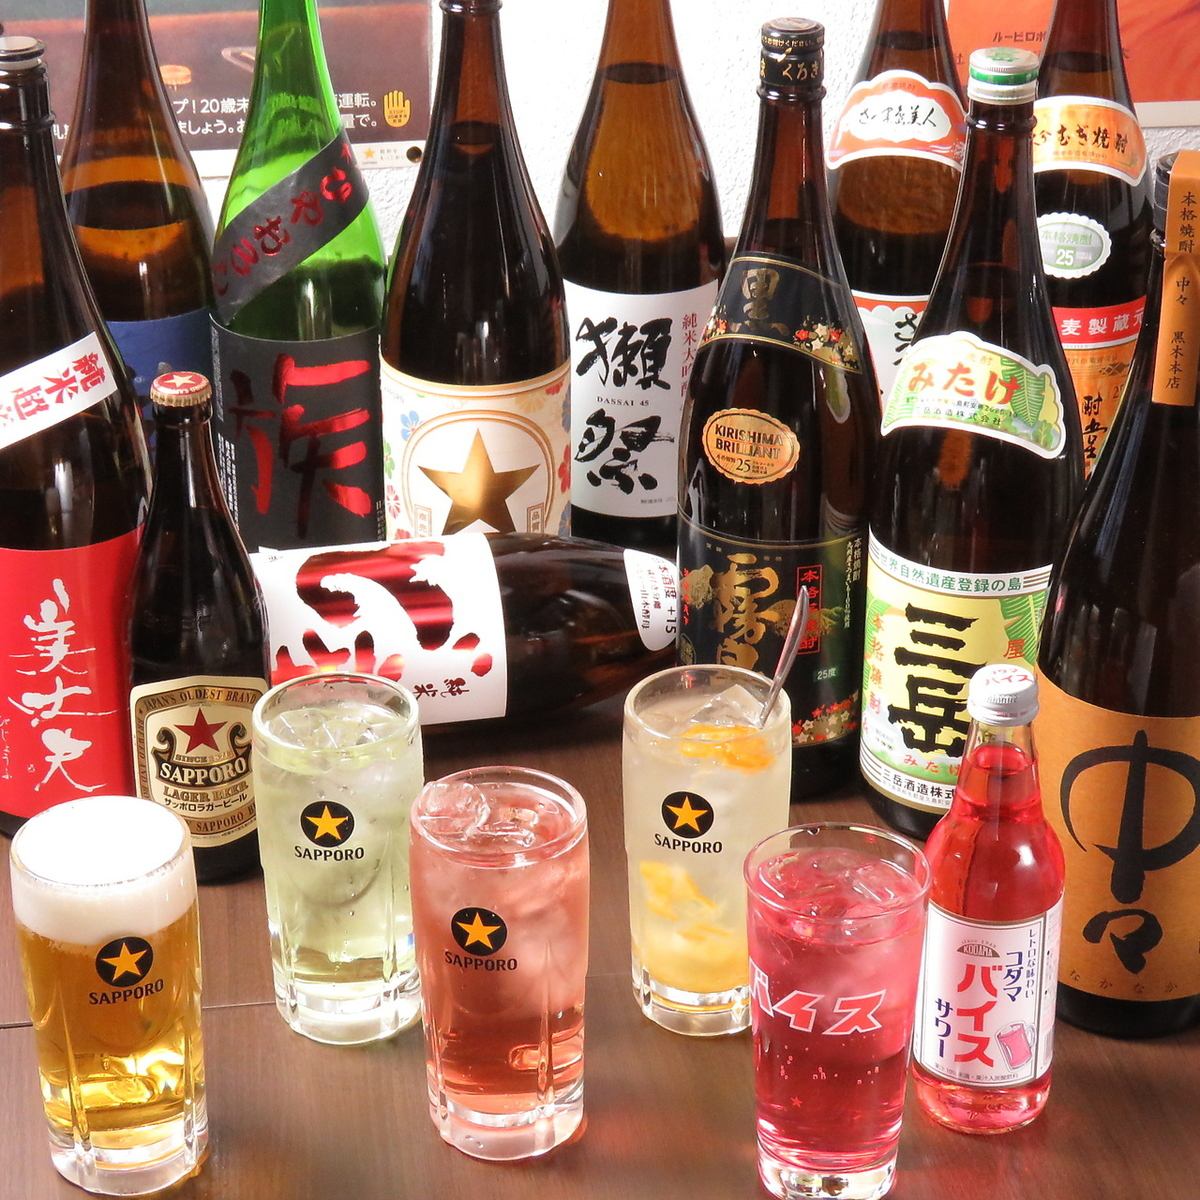 2H all-you-can-drink 1500 yen ★